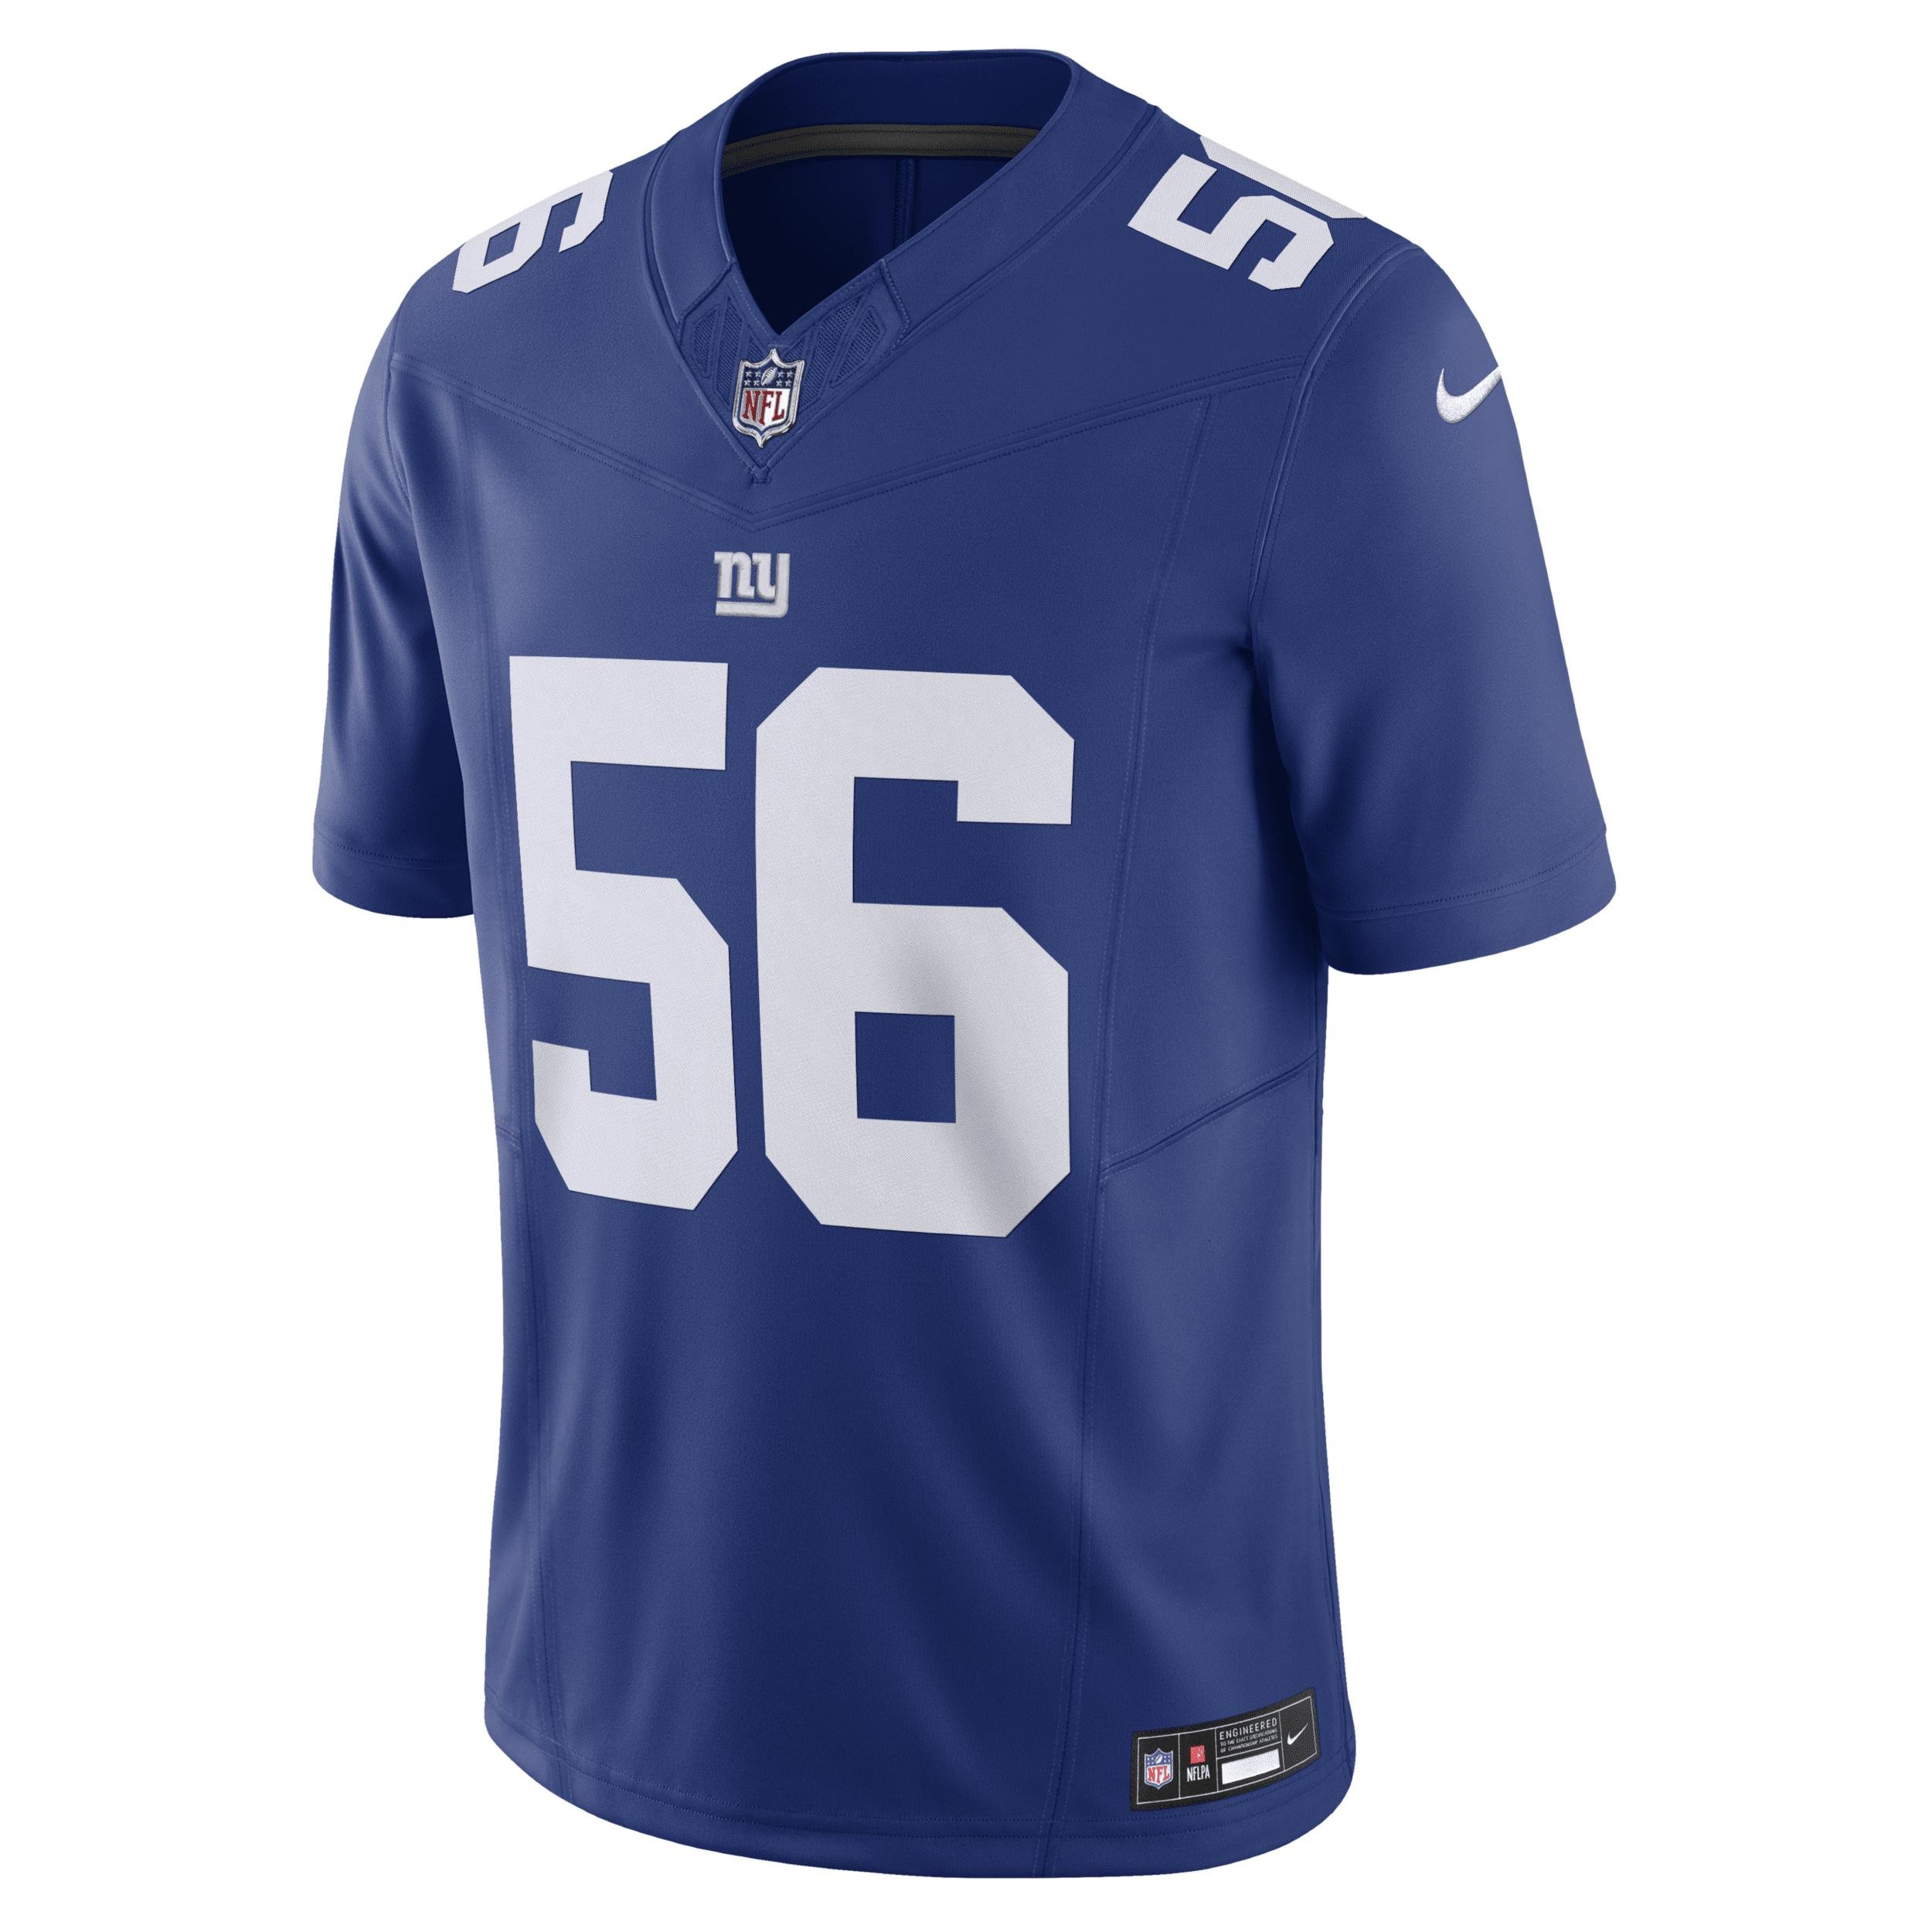 Lawrence Taylor New York Giants Nike Men's Dri-FIT NFL Limited Football Jersey by NIKE